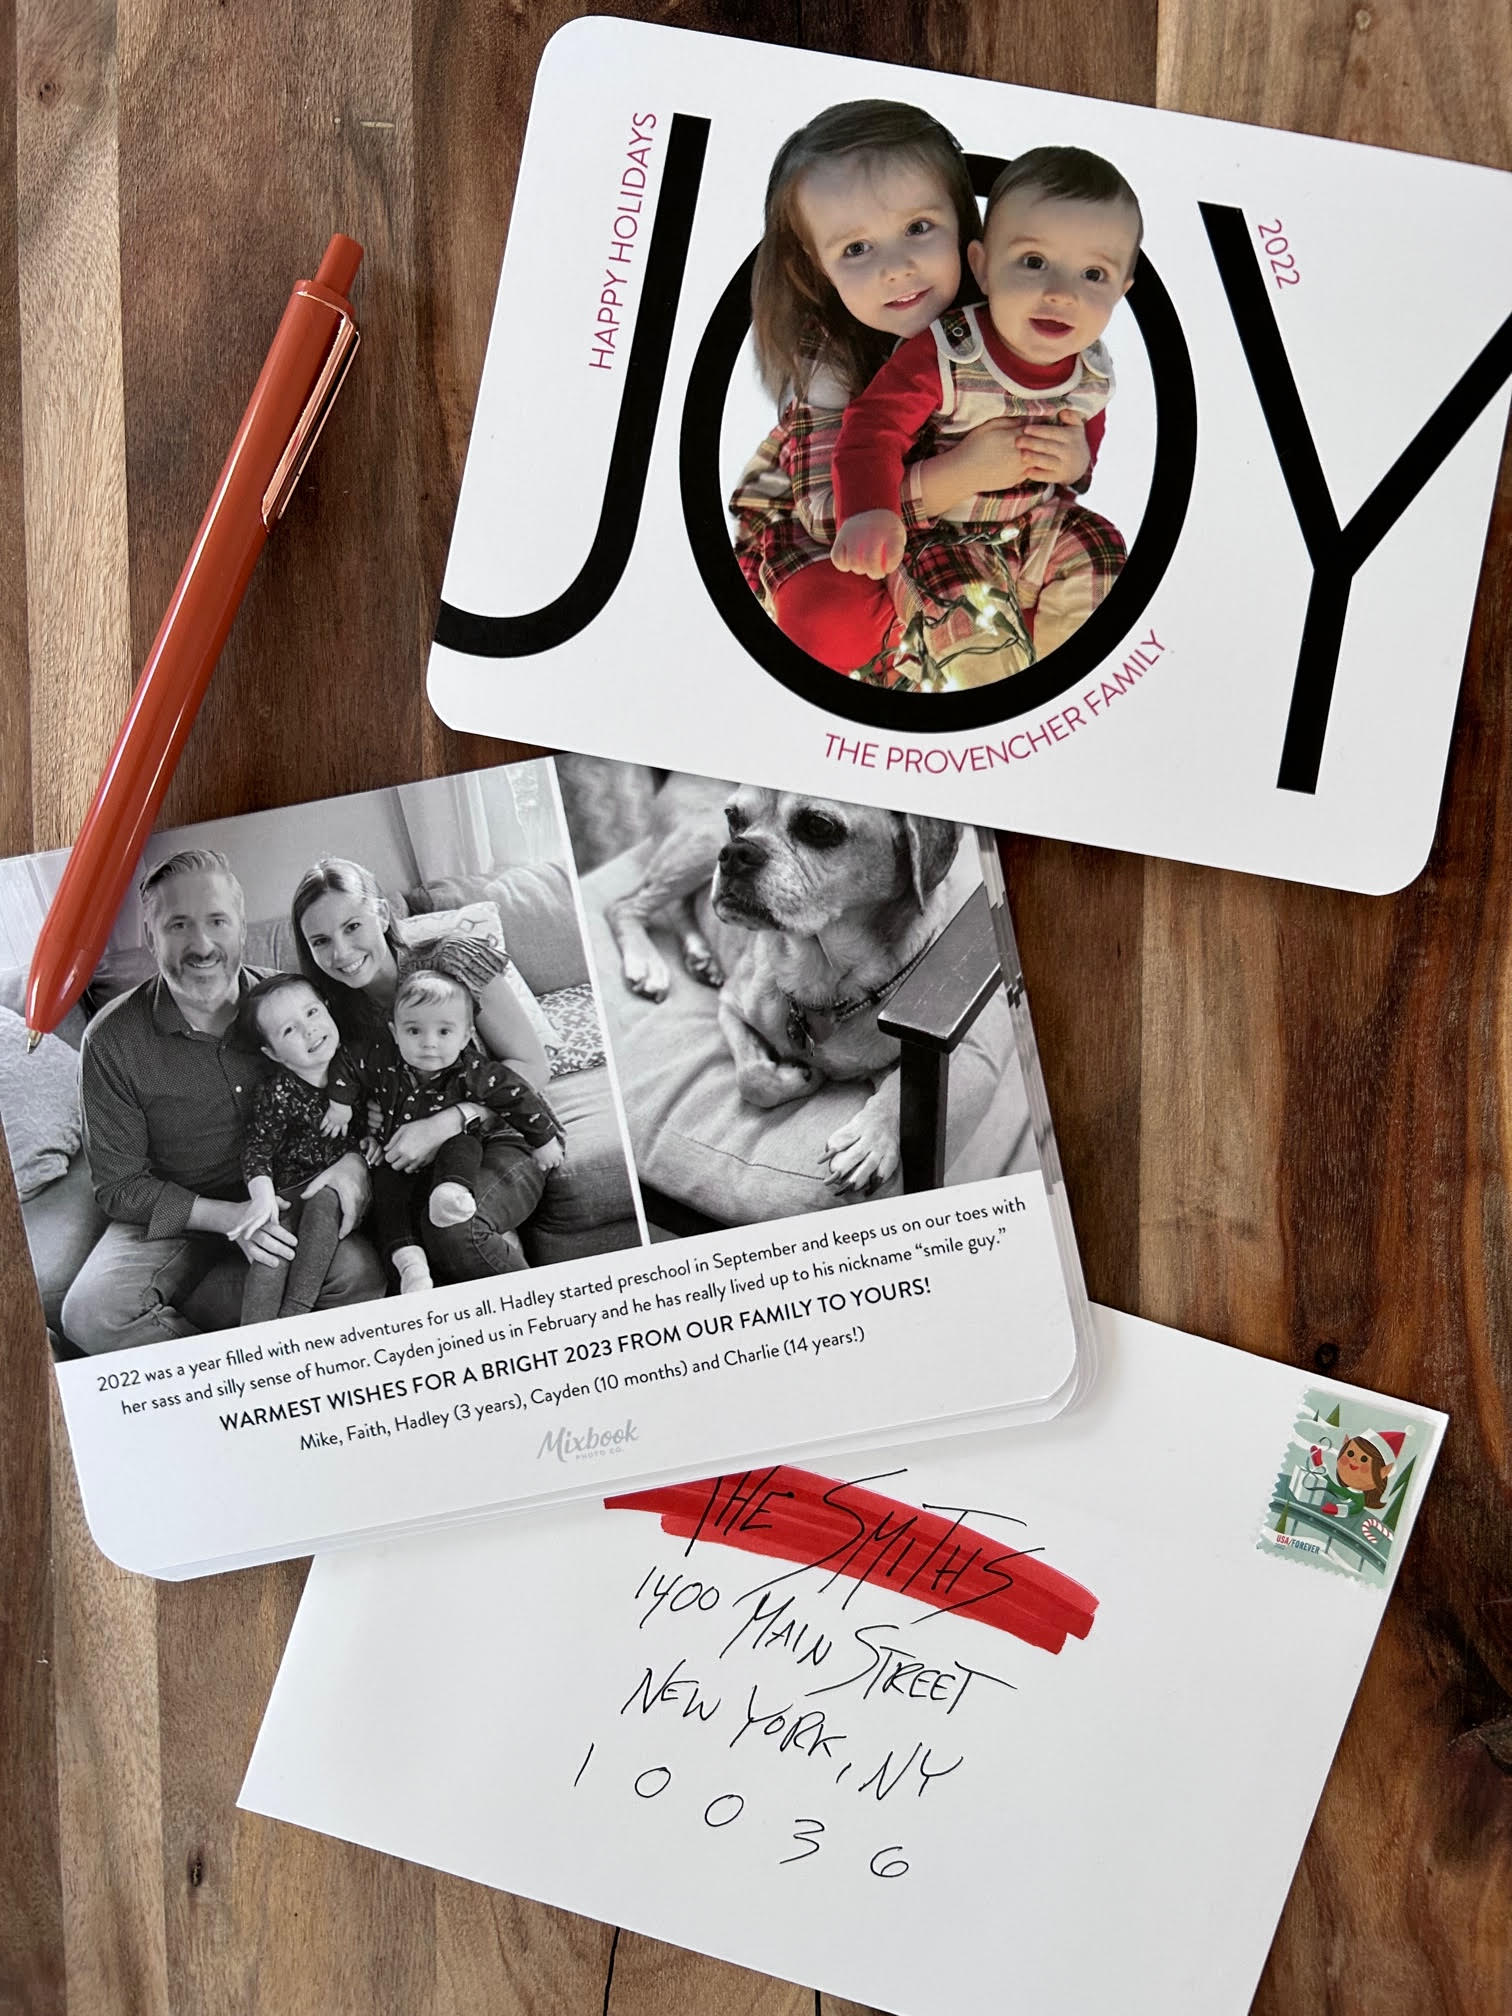 How To Get Your Holiday Cards Printed /// By Design Fixation #christmas #holiday_cards #print_your_own